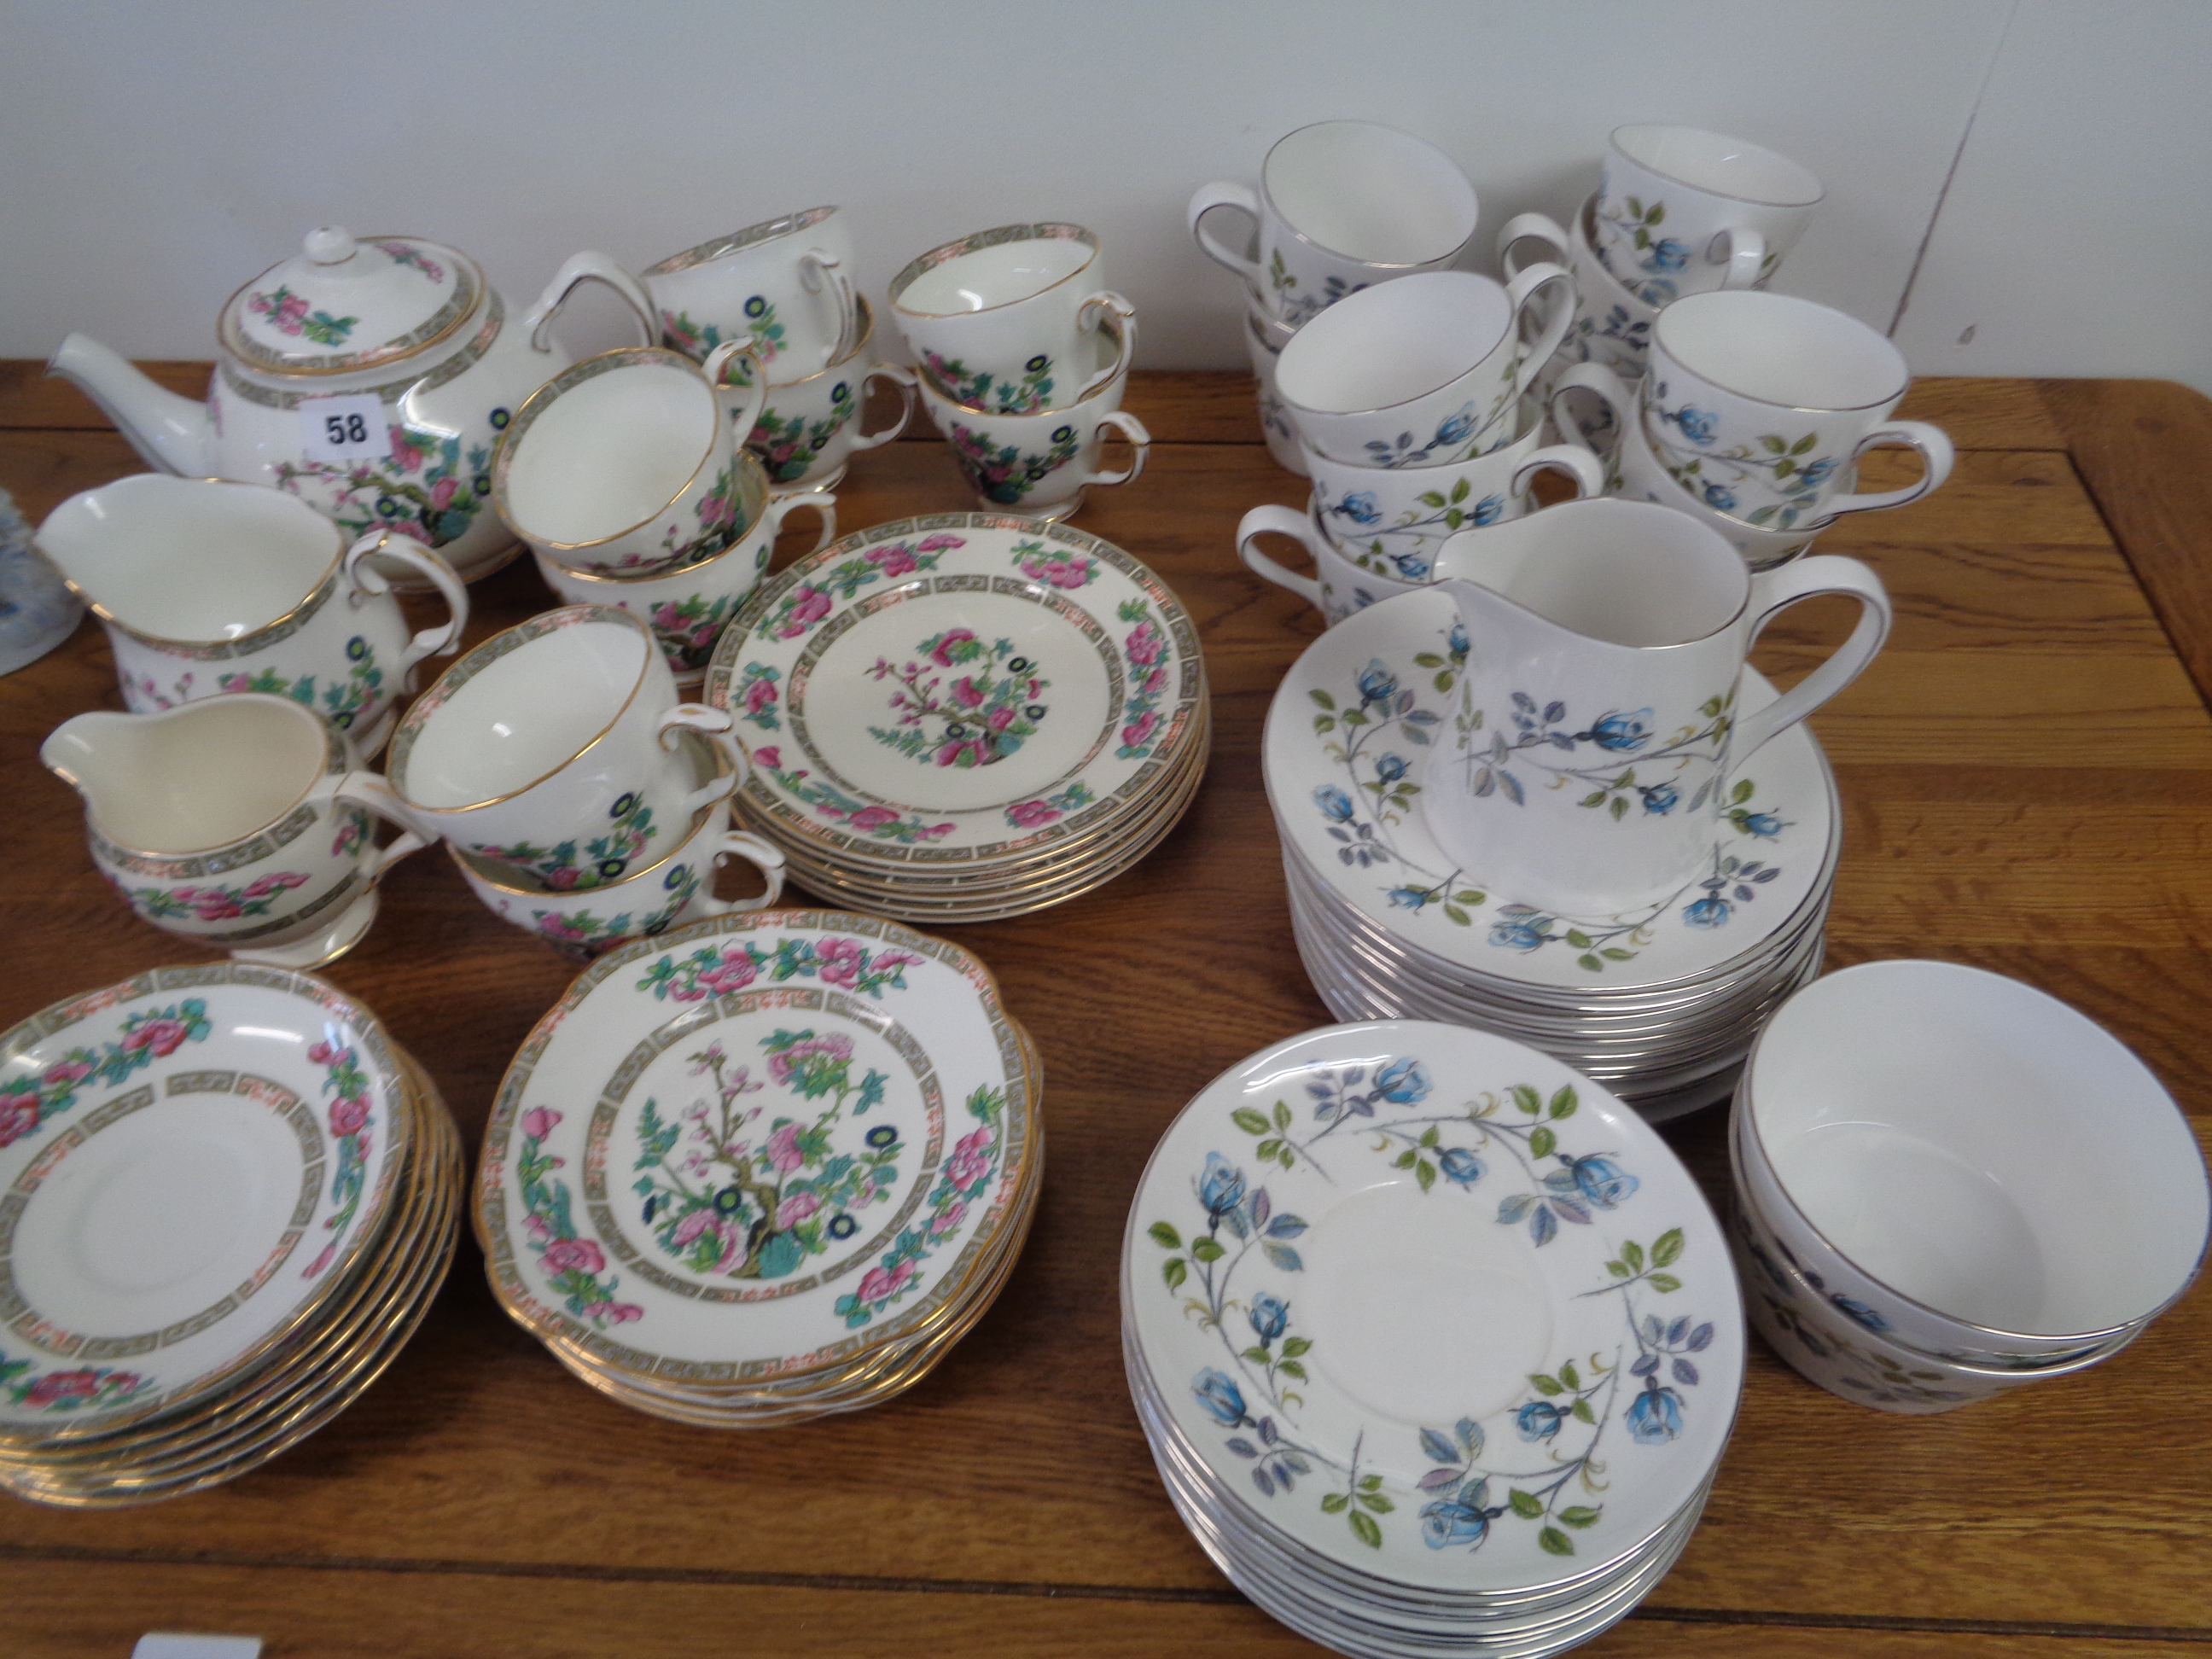 Duchess Indian Tree pattern tea set and a Tuscan China floral decorated tea set